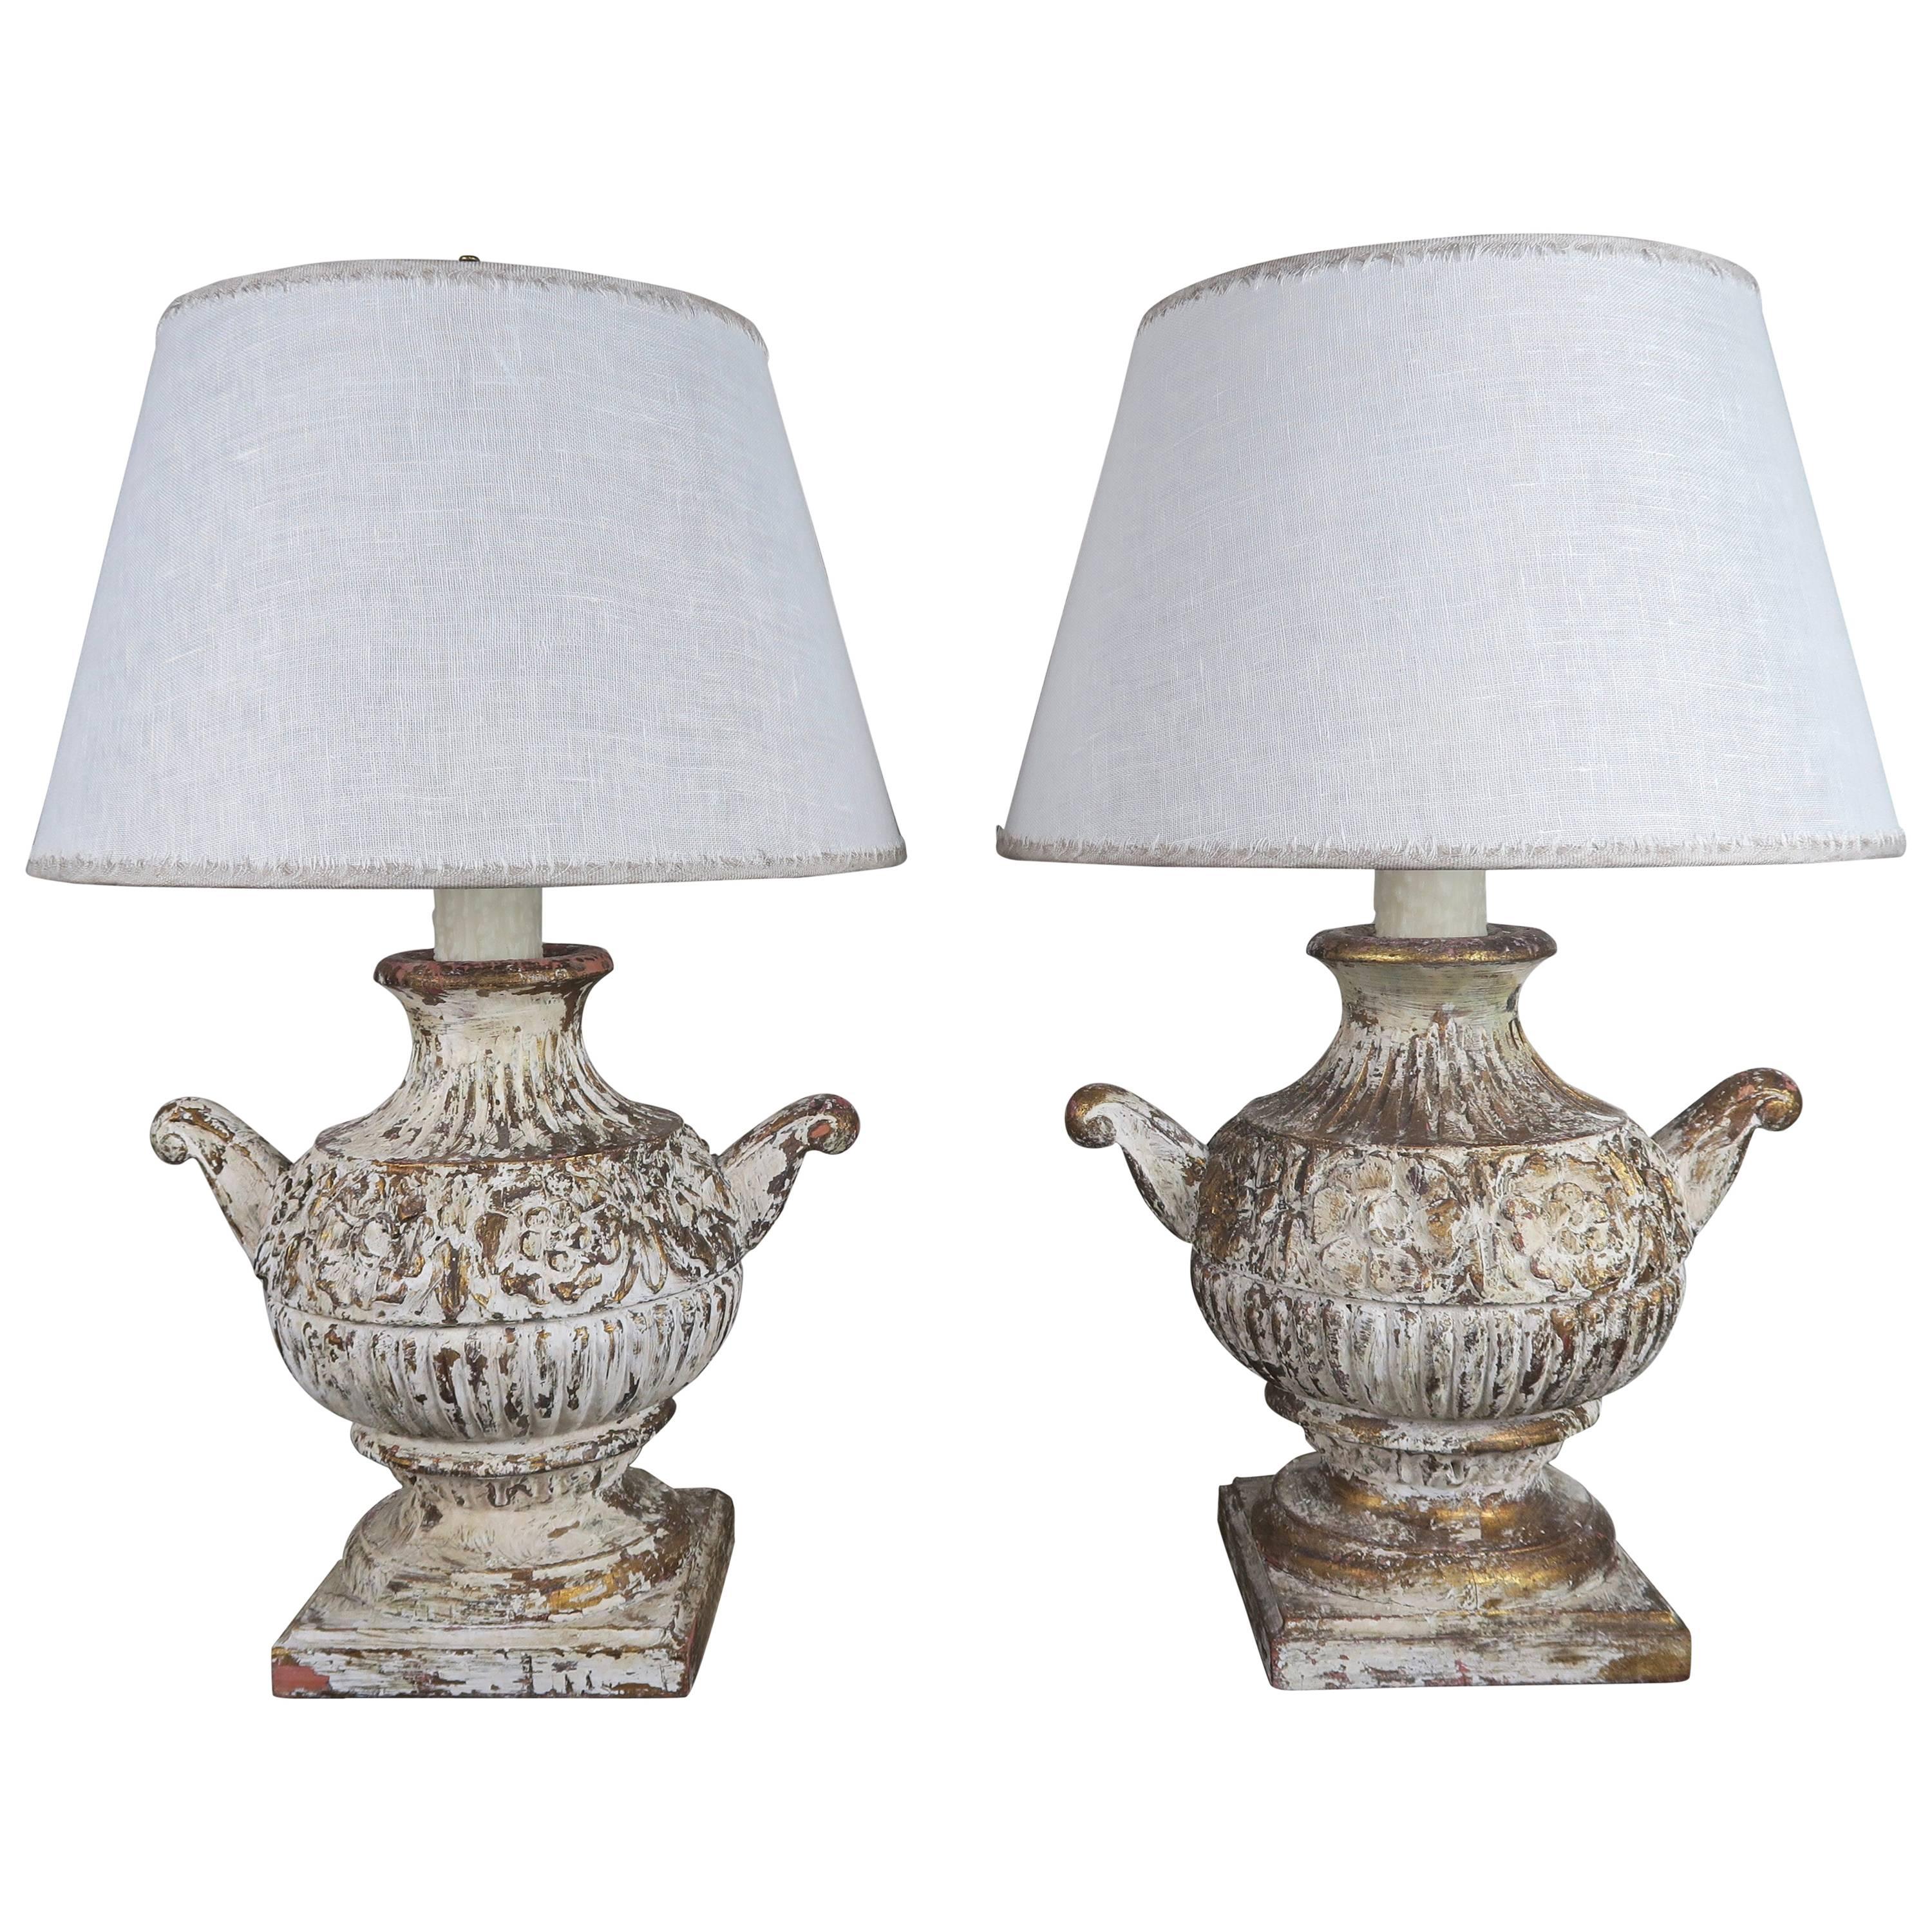 Pair of Carved Italian Painted Urn Lamps with Custom Linen Shades